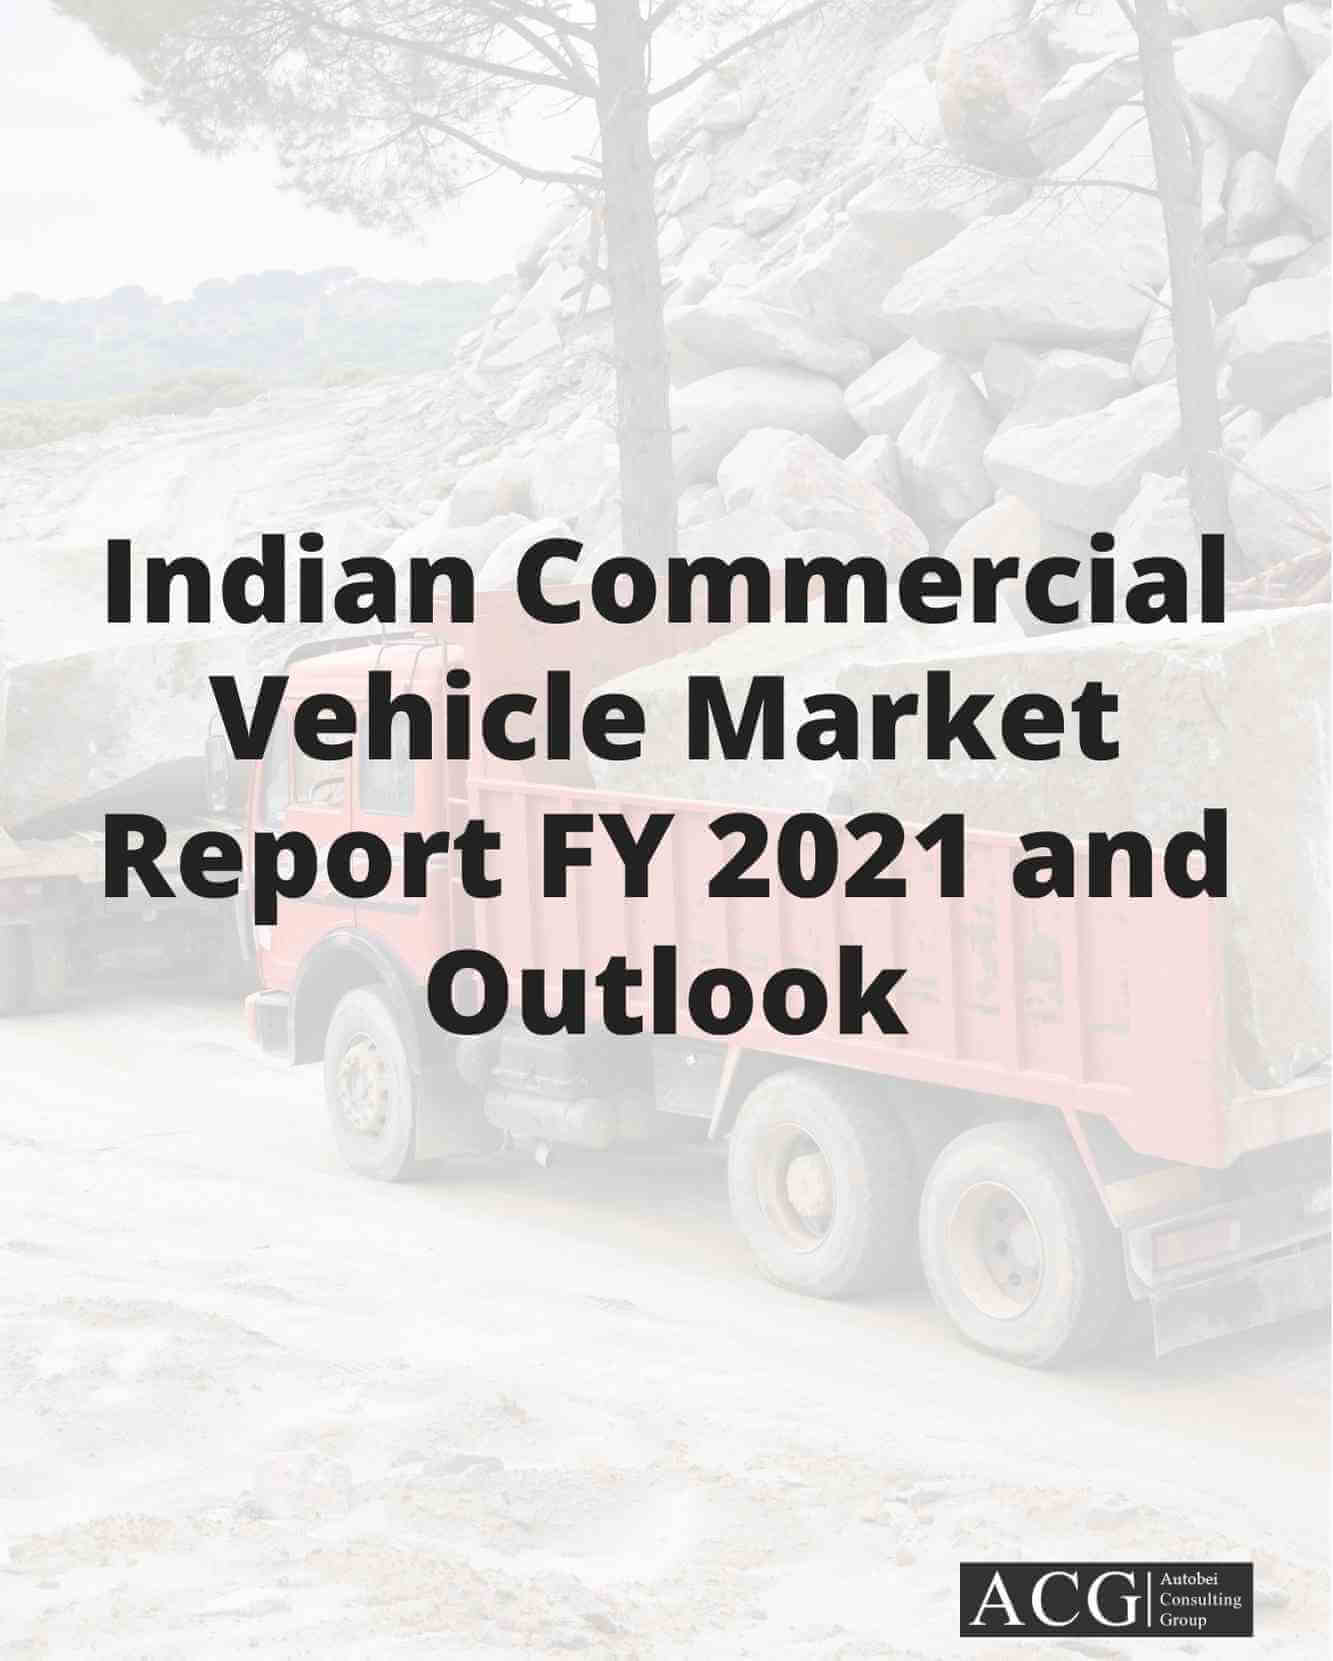 Indian Commercial Vehicle Market Report FY 2021 and Outlook